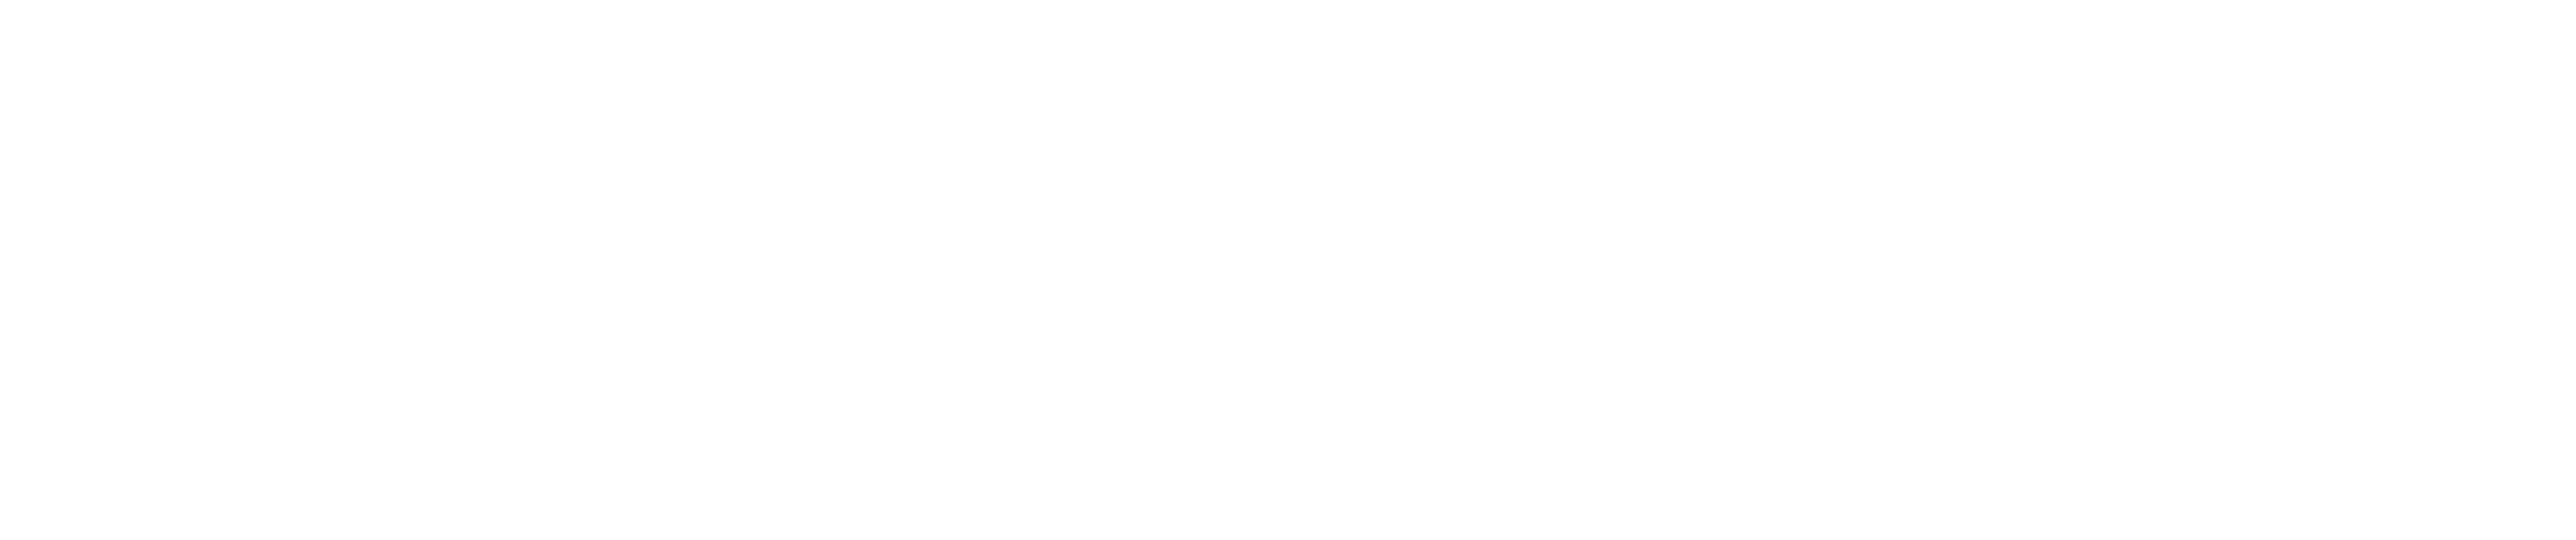 Co-Funded by the EU logo white